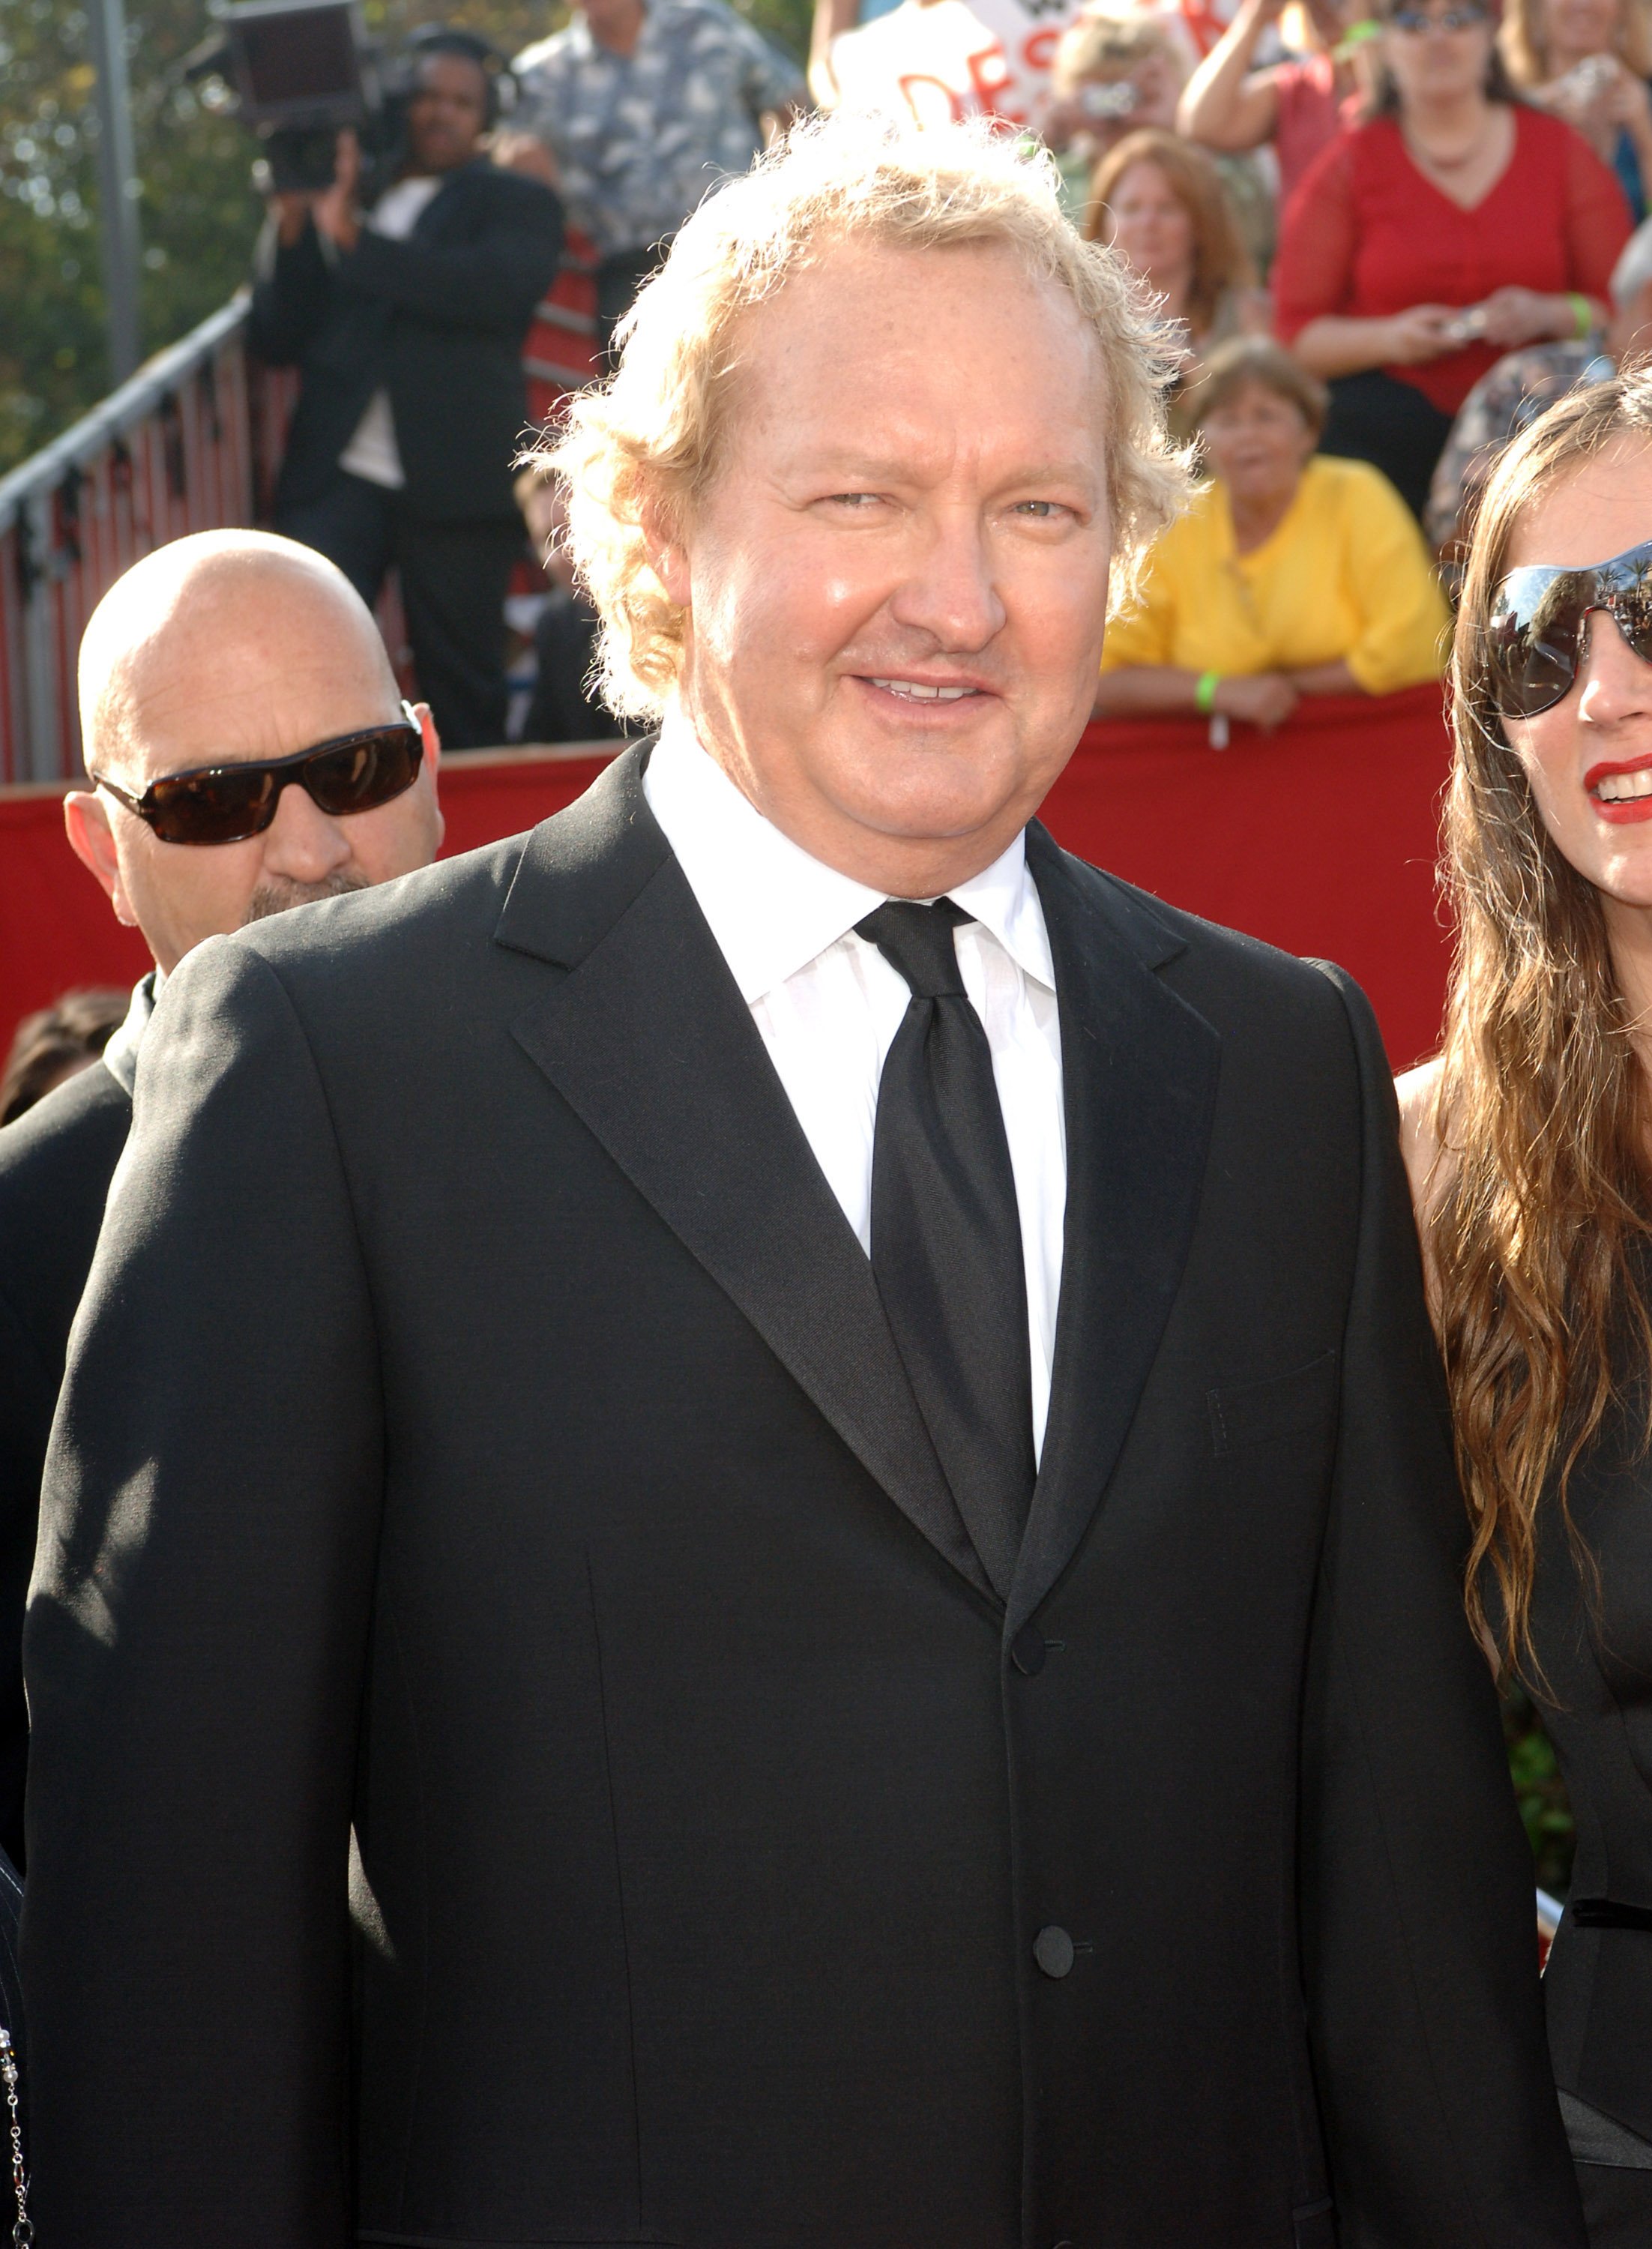 Randy Quaid attends the 57th Annual Primetime Emmy Awards in Los Angeles, California. | Source: Getty Images